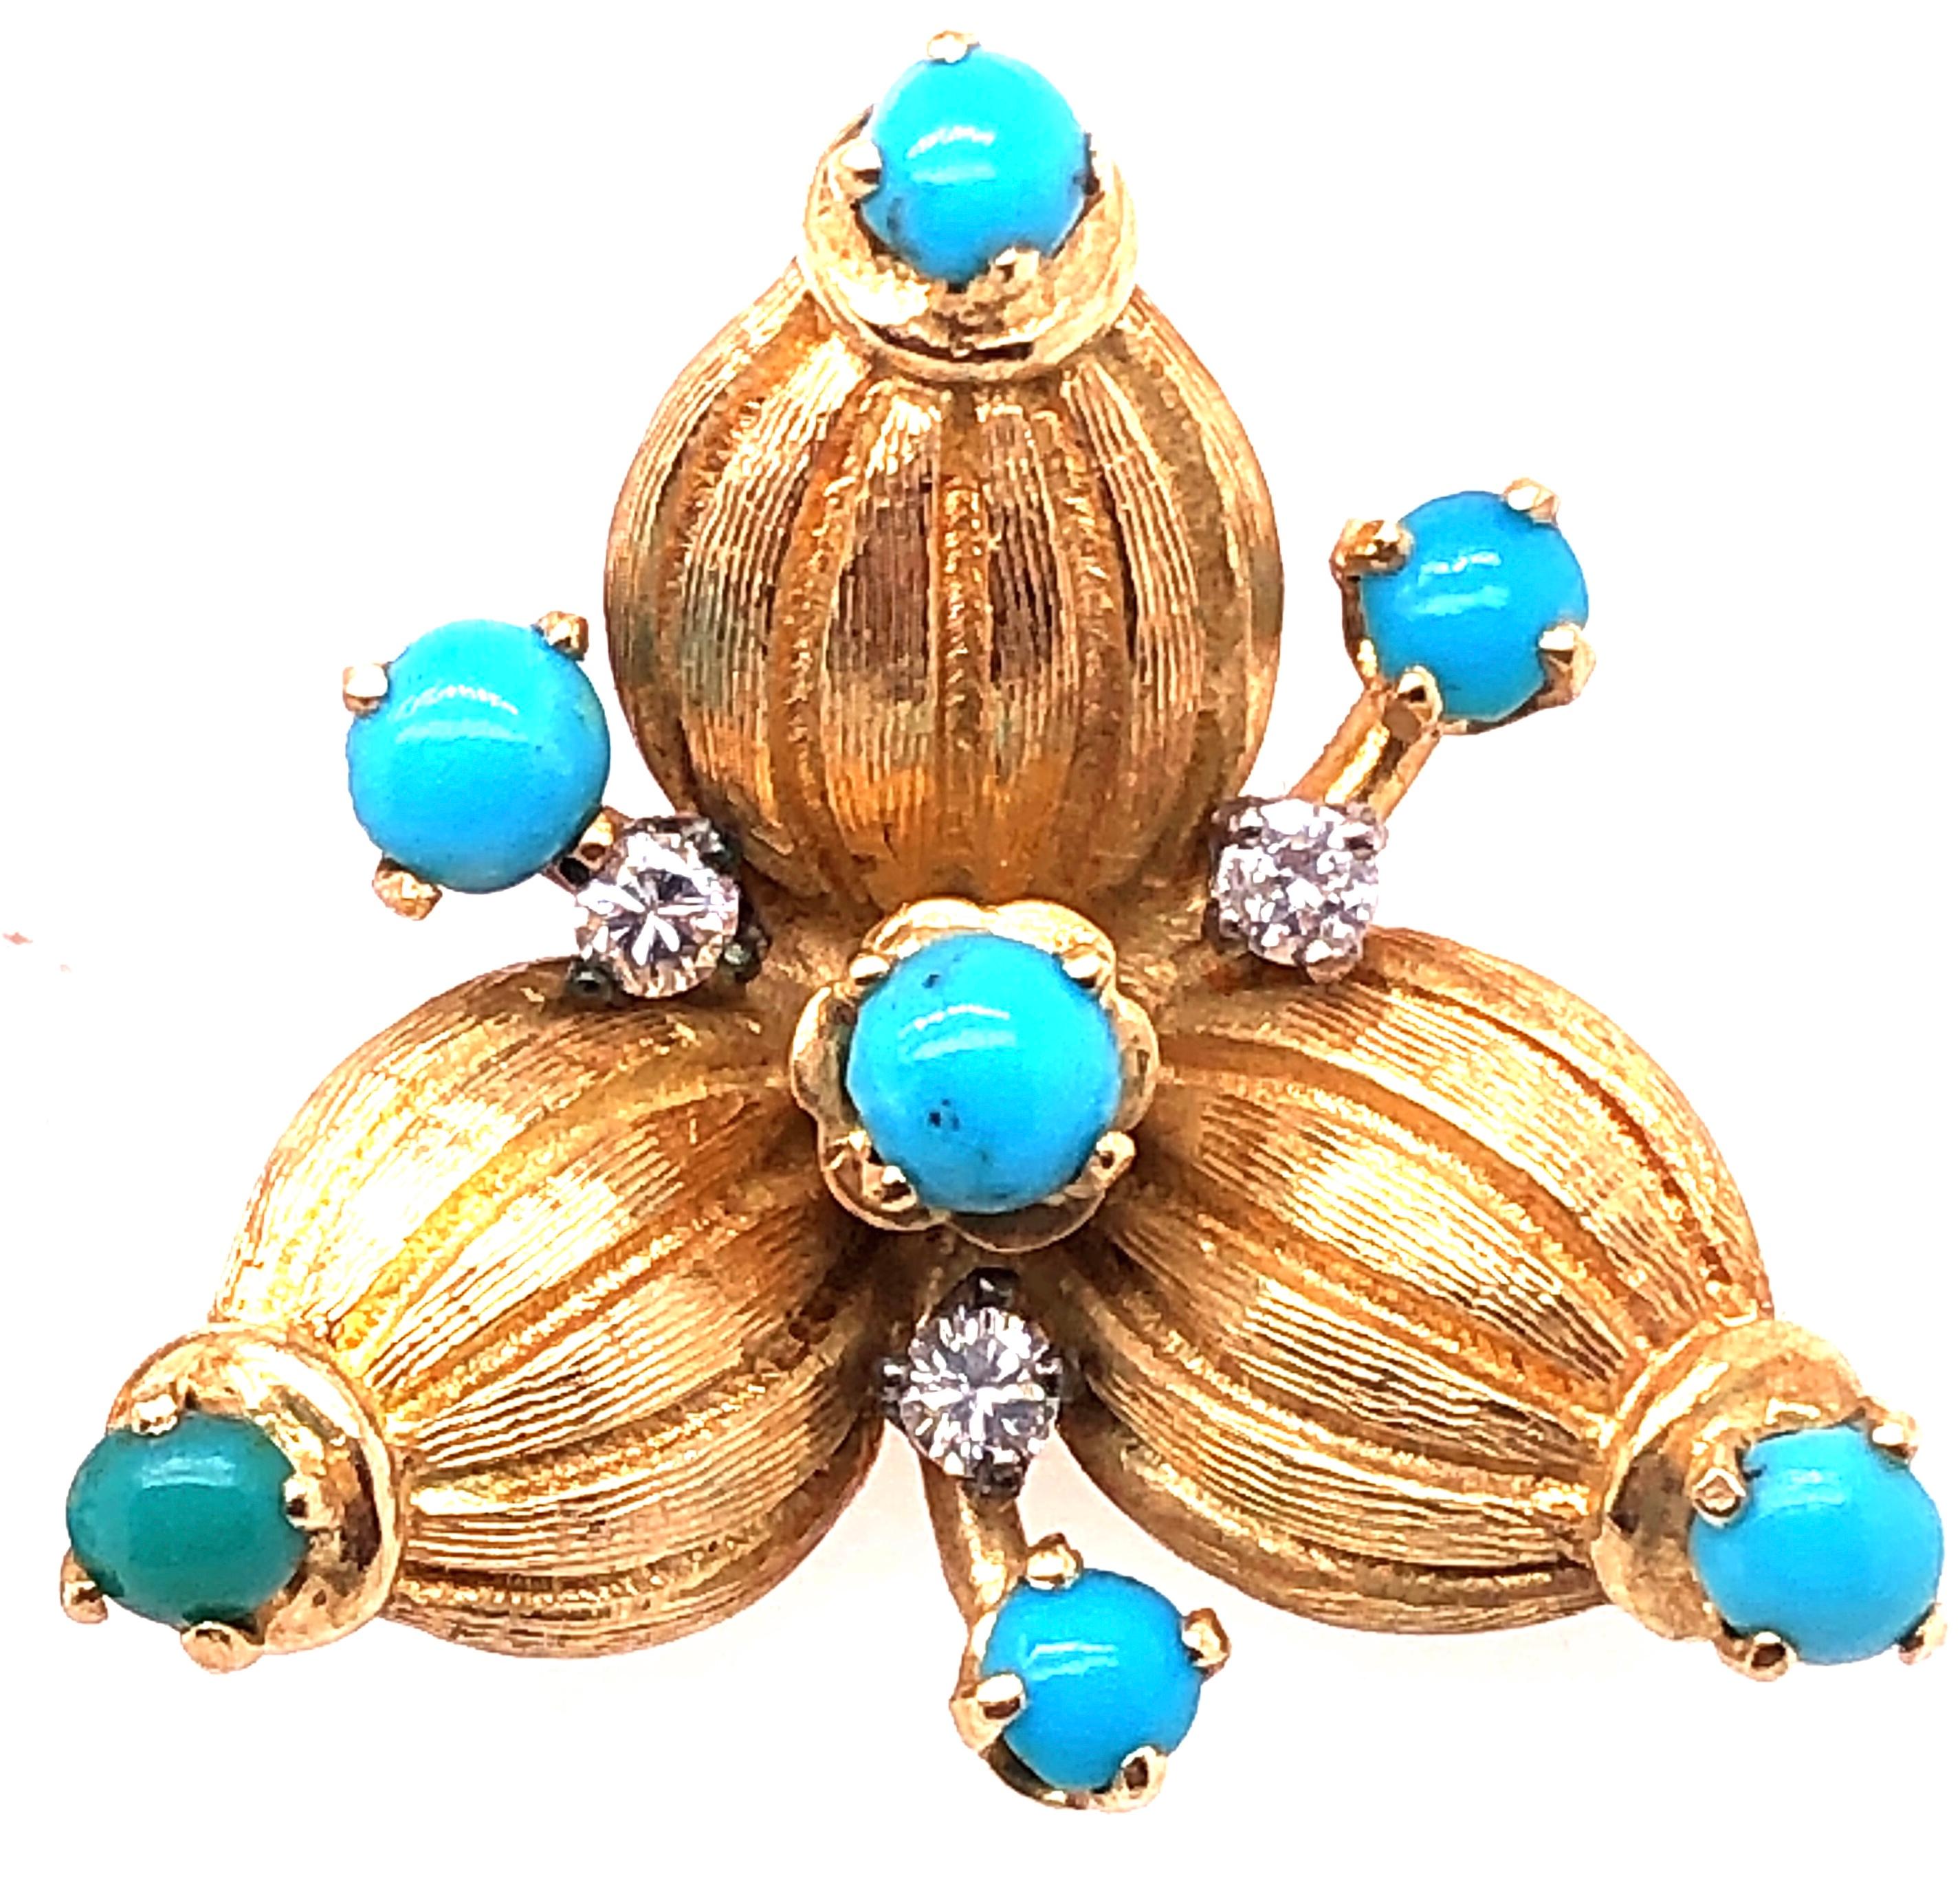 18 Karat Yellow Gold Vintage Earrings with Round Diamonds Turquoise.
13.5 grams total weight
3.22 mm stones size
2.5 mm diamond size